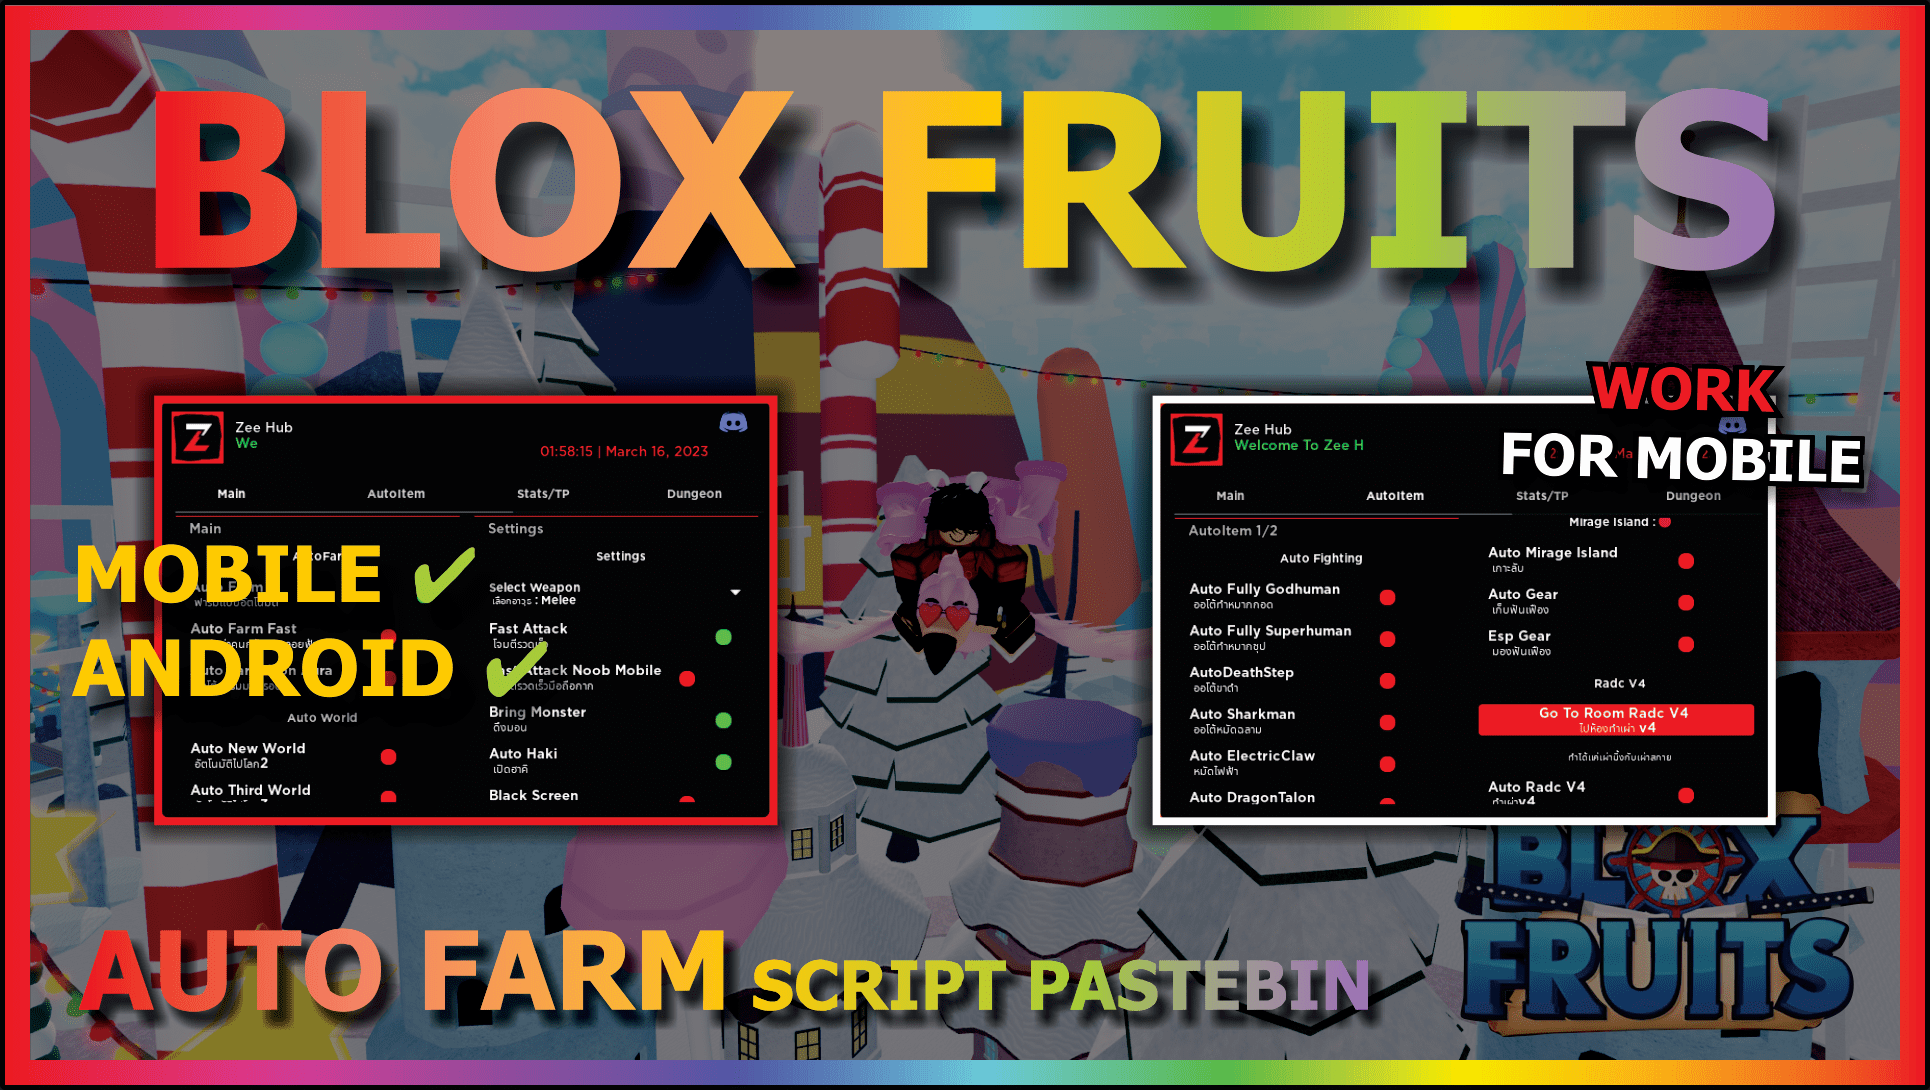 NEW UPDATE ] EXECUTOR ANDROID FLUXUS AND SCRIPT BLOX FRUIT